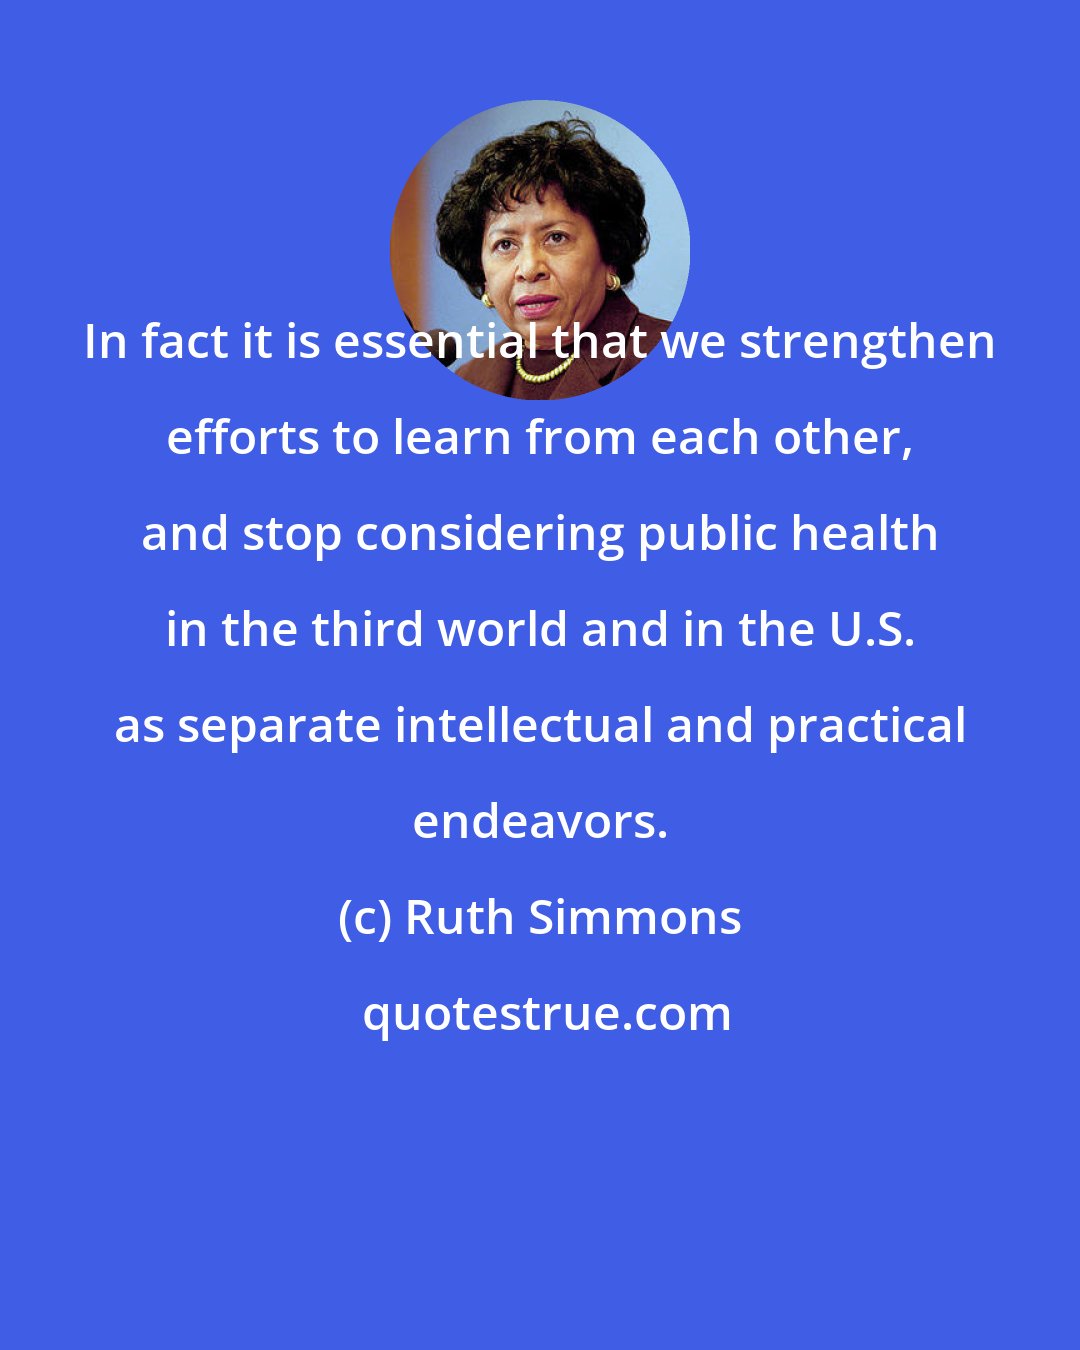 Ruth Simmons: In fact it is essential that we strengthen efforts to learn from each other, and stop considering public health in the third world and in the U.S. as separate intellectual and practical endeavors.